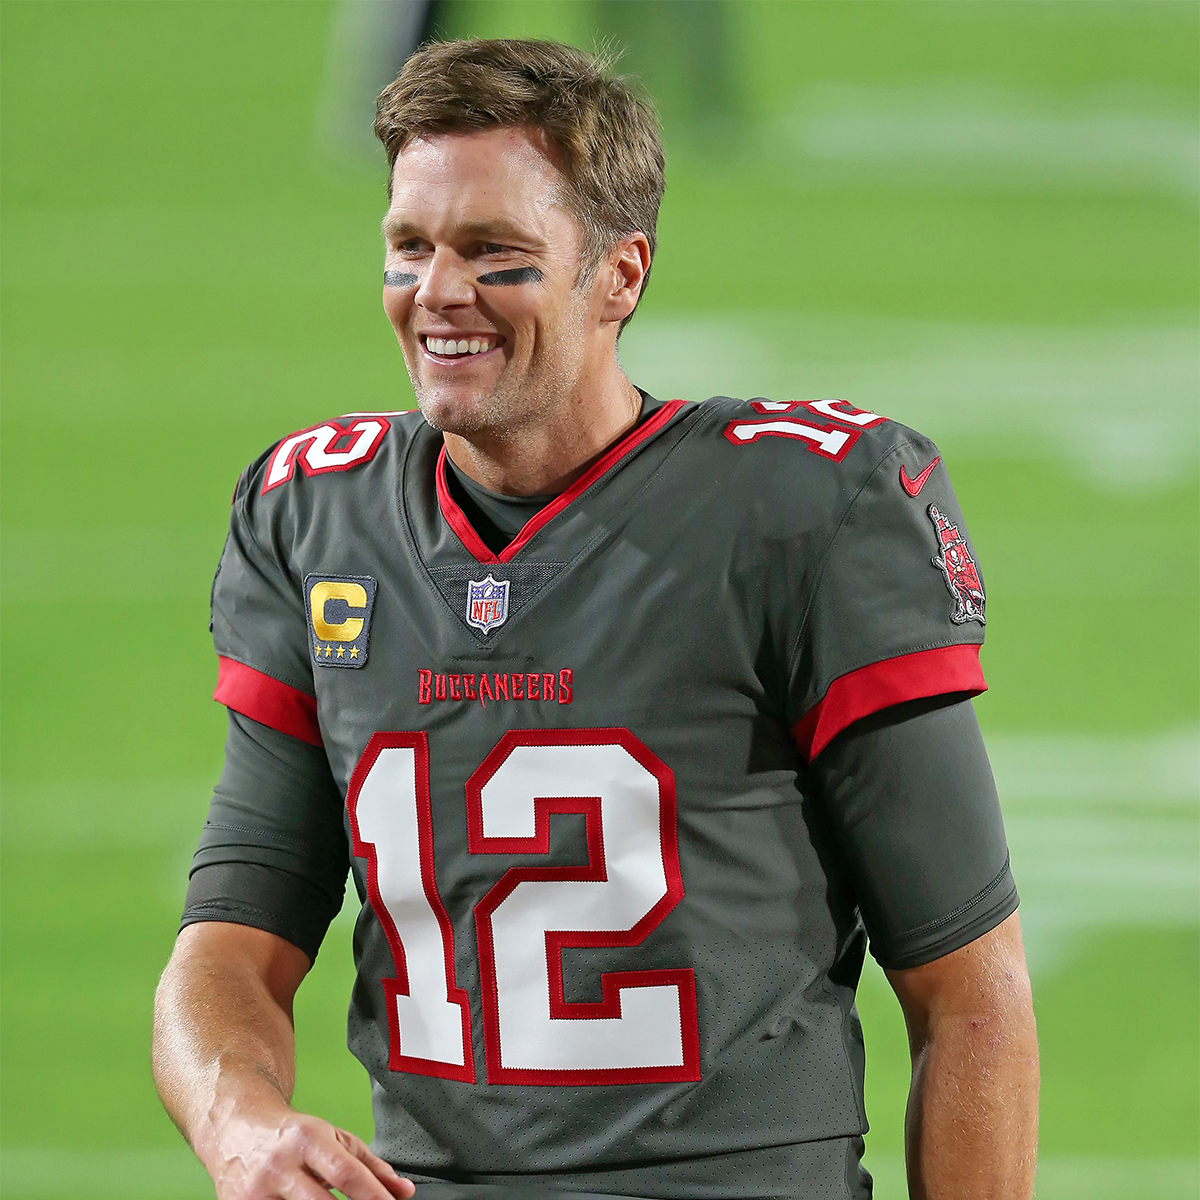 Buccaneers Player Says He 'Loves' that Tom Brady Yelled at Them